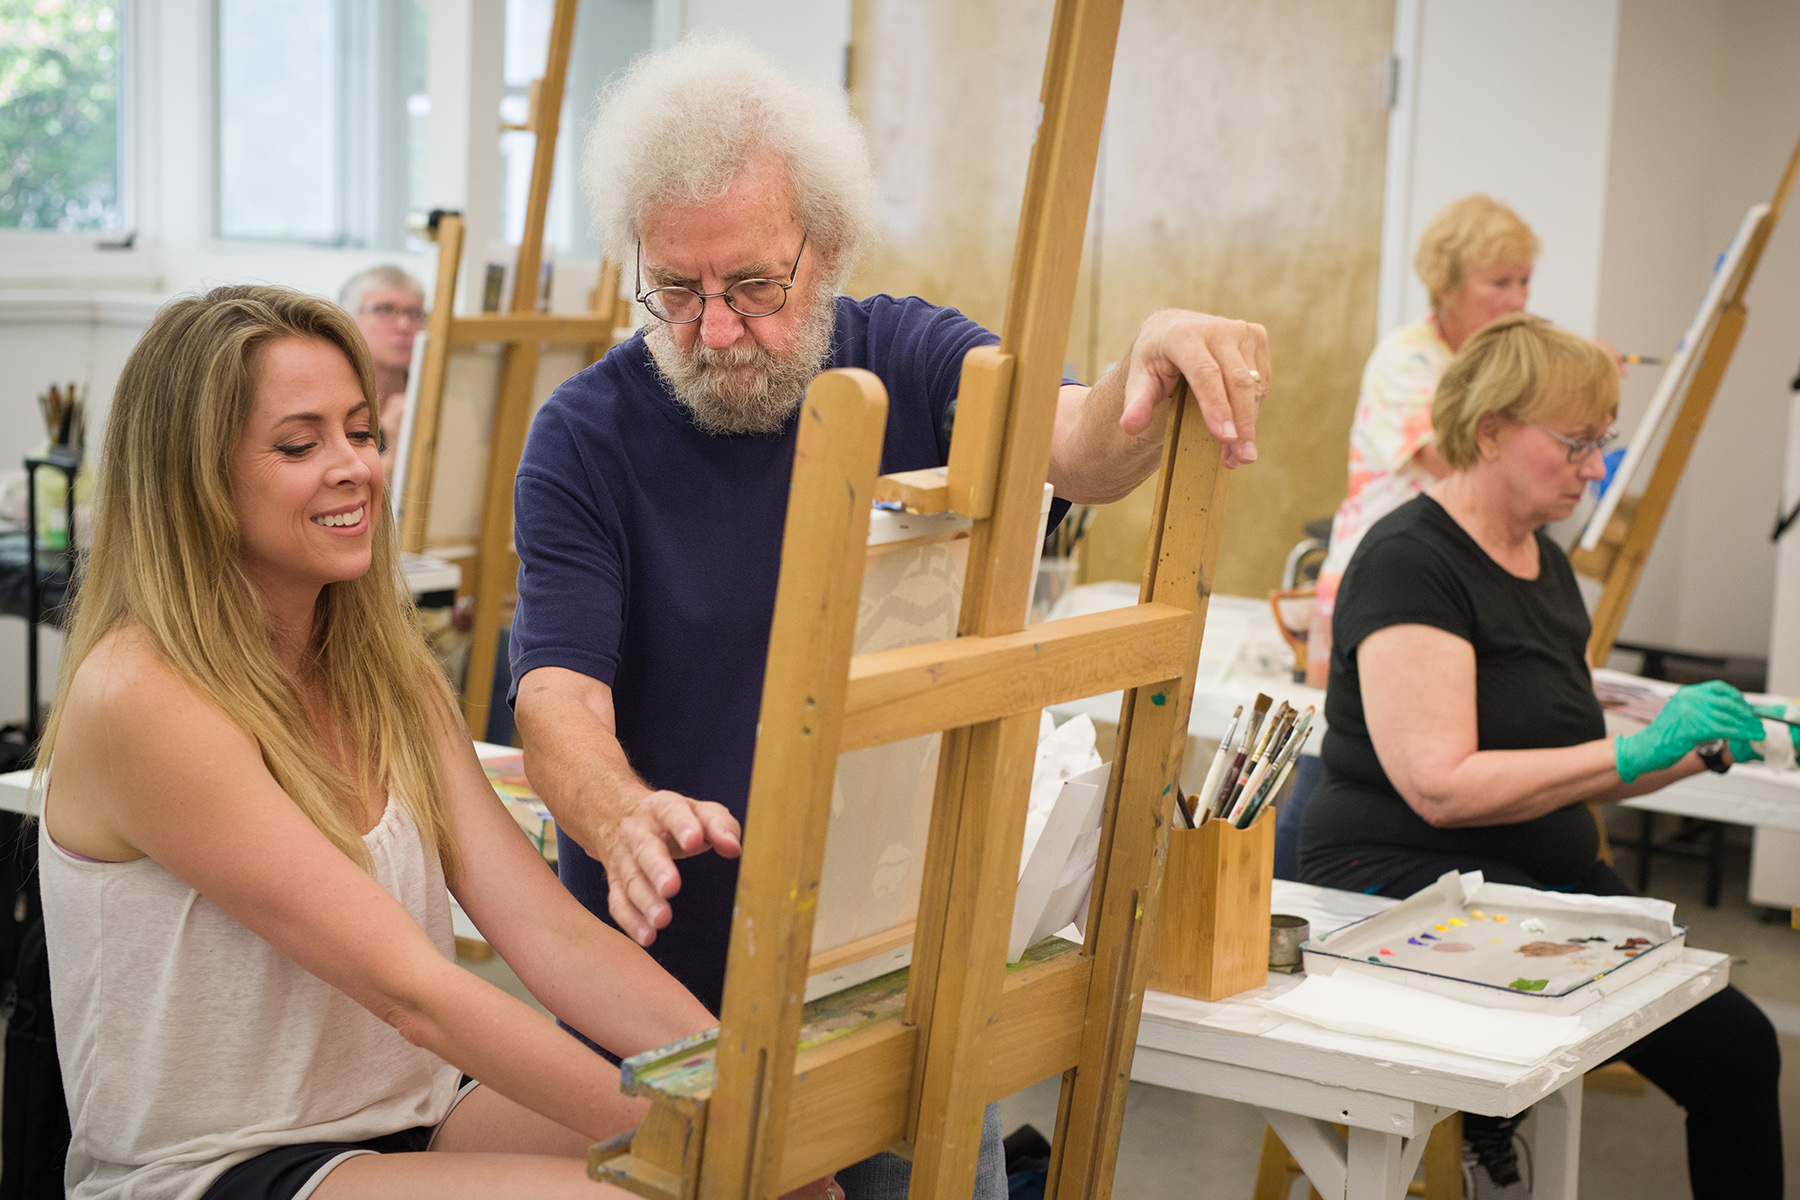 Instructor Bud Deihl helps an oil painting student during one of the many classes offered at Valley Art Center. Photo by Valley Art Center / Michael Steinberg